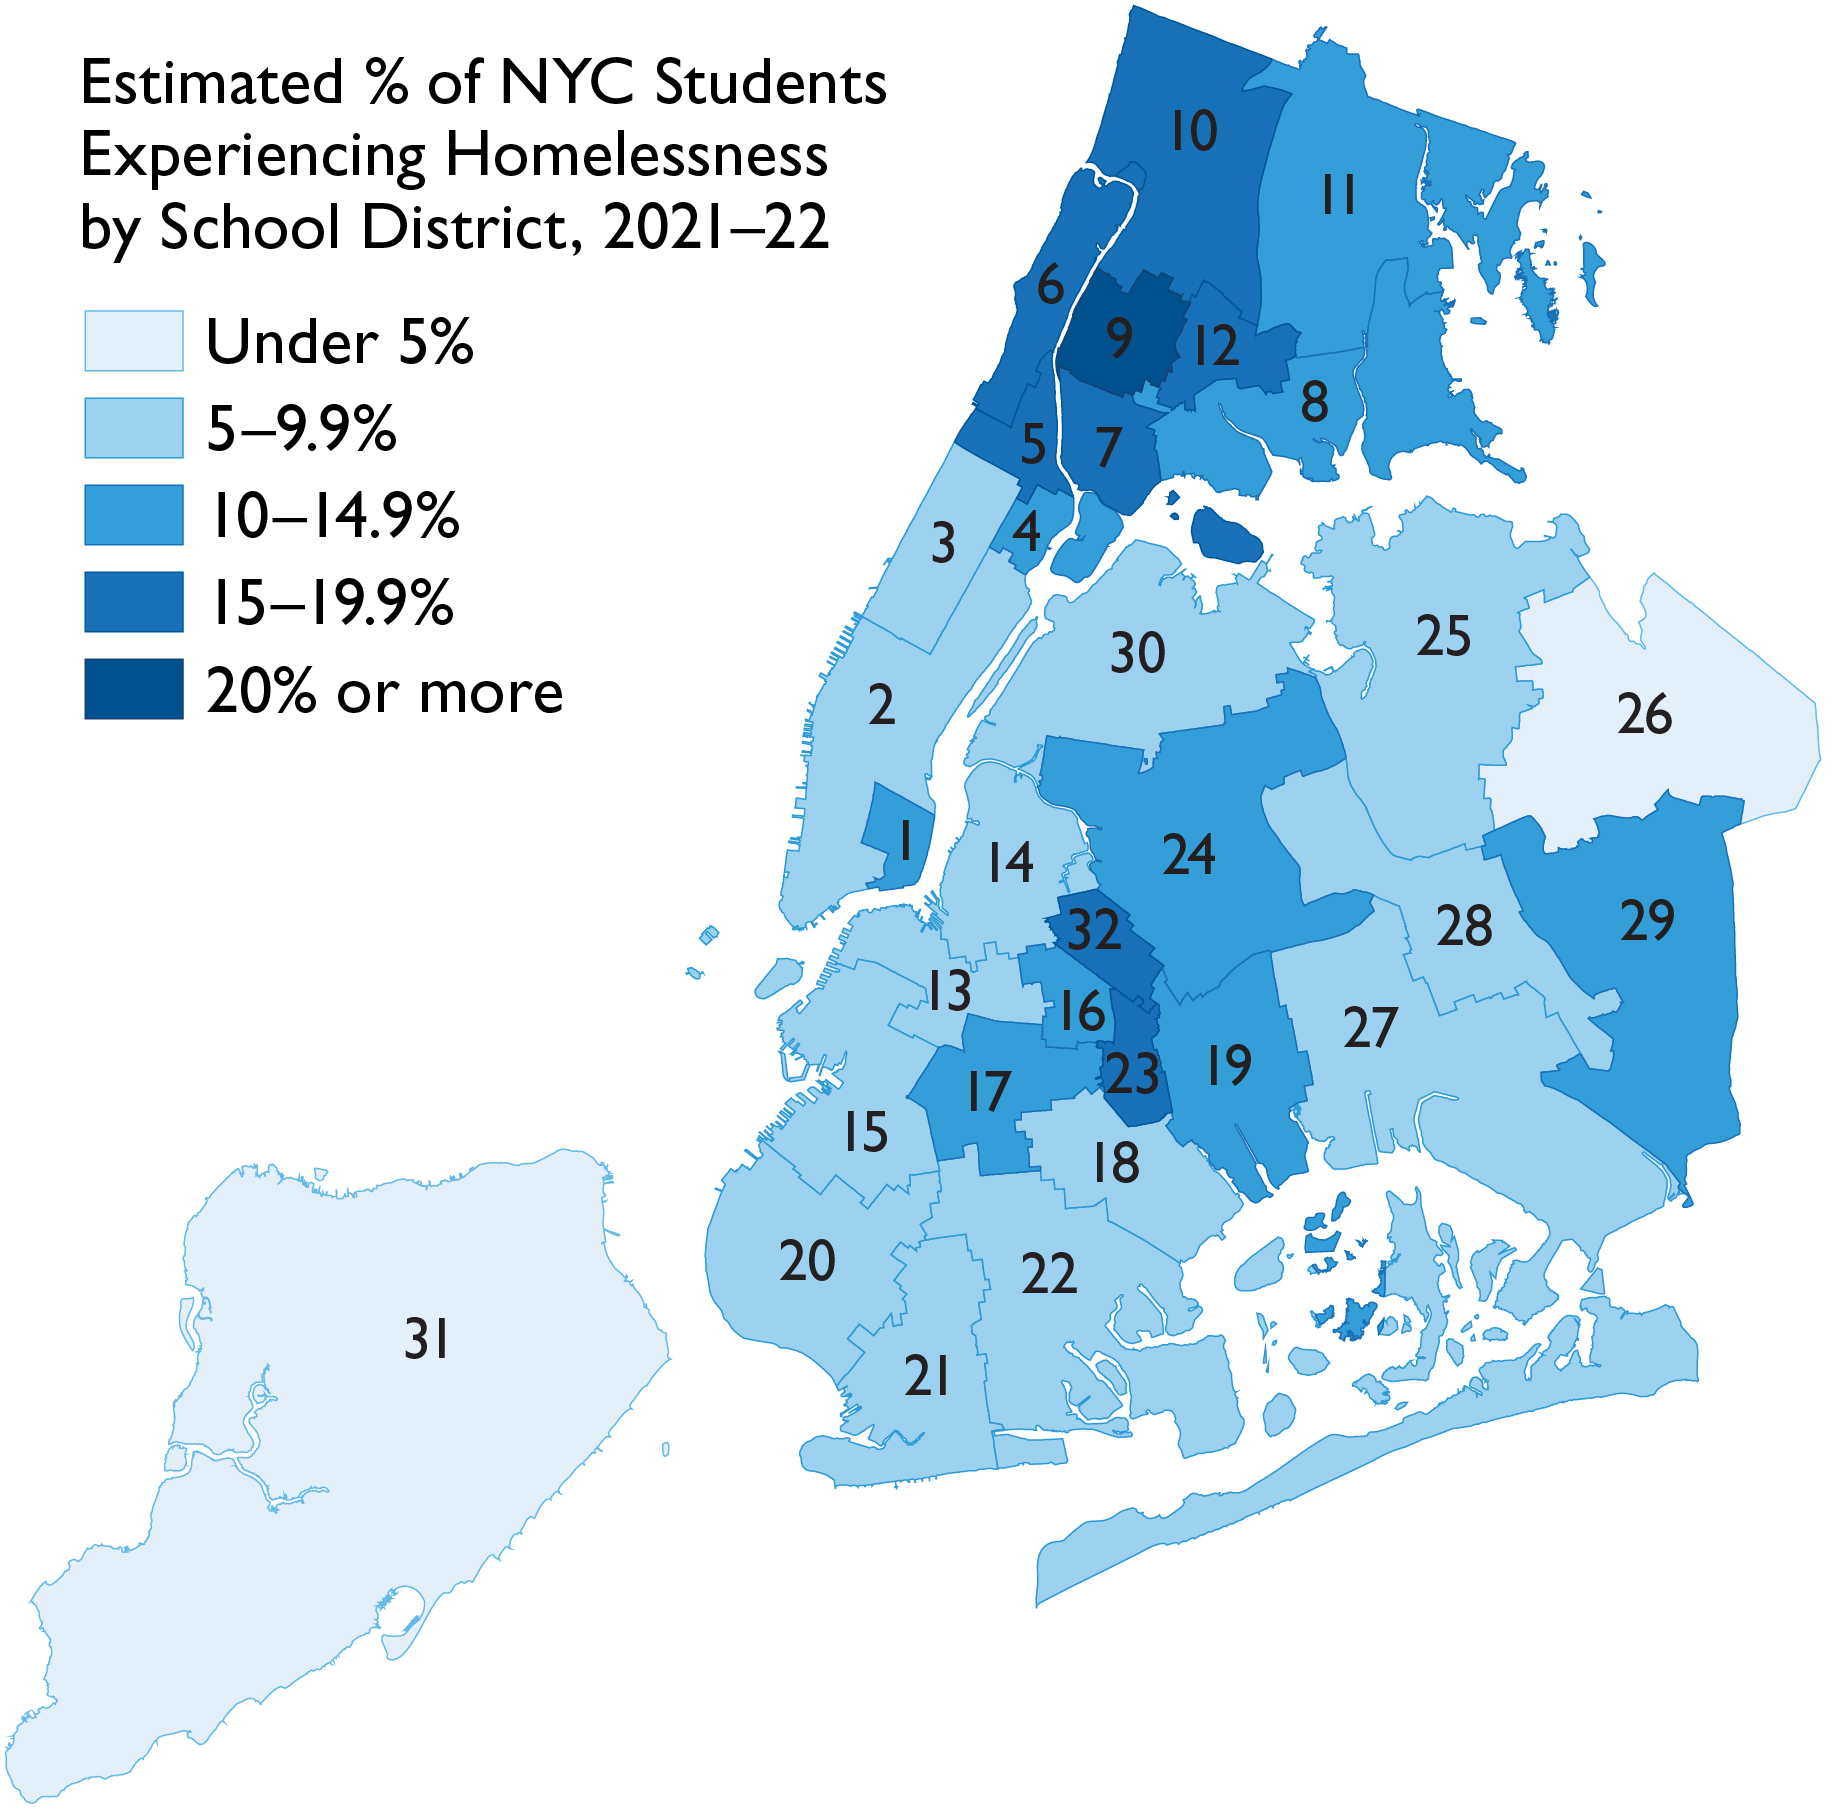 Map of NYC by school district, shaded to indicate the estimated % of students experiencing homelessness in each district in 2021-22; shows particularly high rates of student homelessness in upper Manhattan, the Bronx, and districts 23 and 32 in Brooklyn.